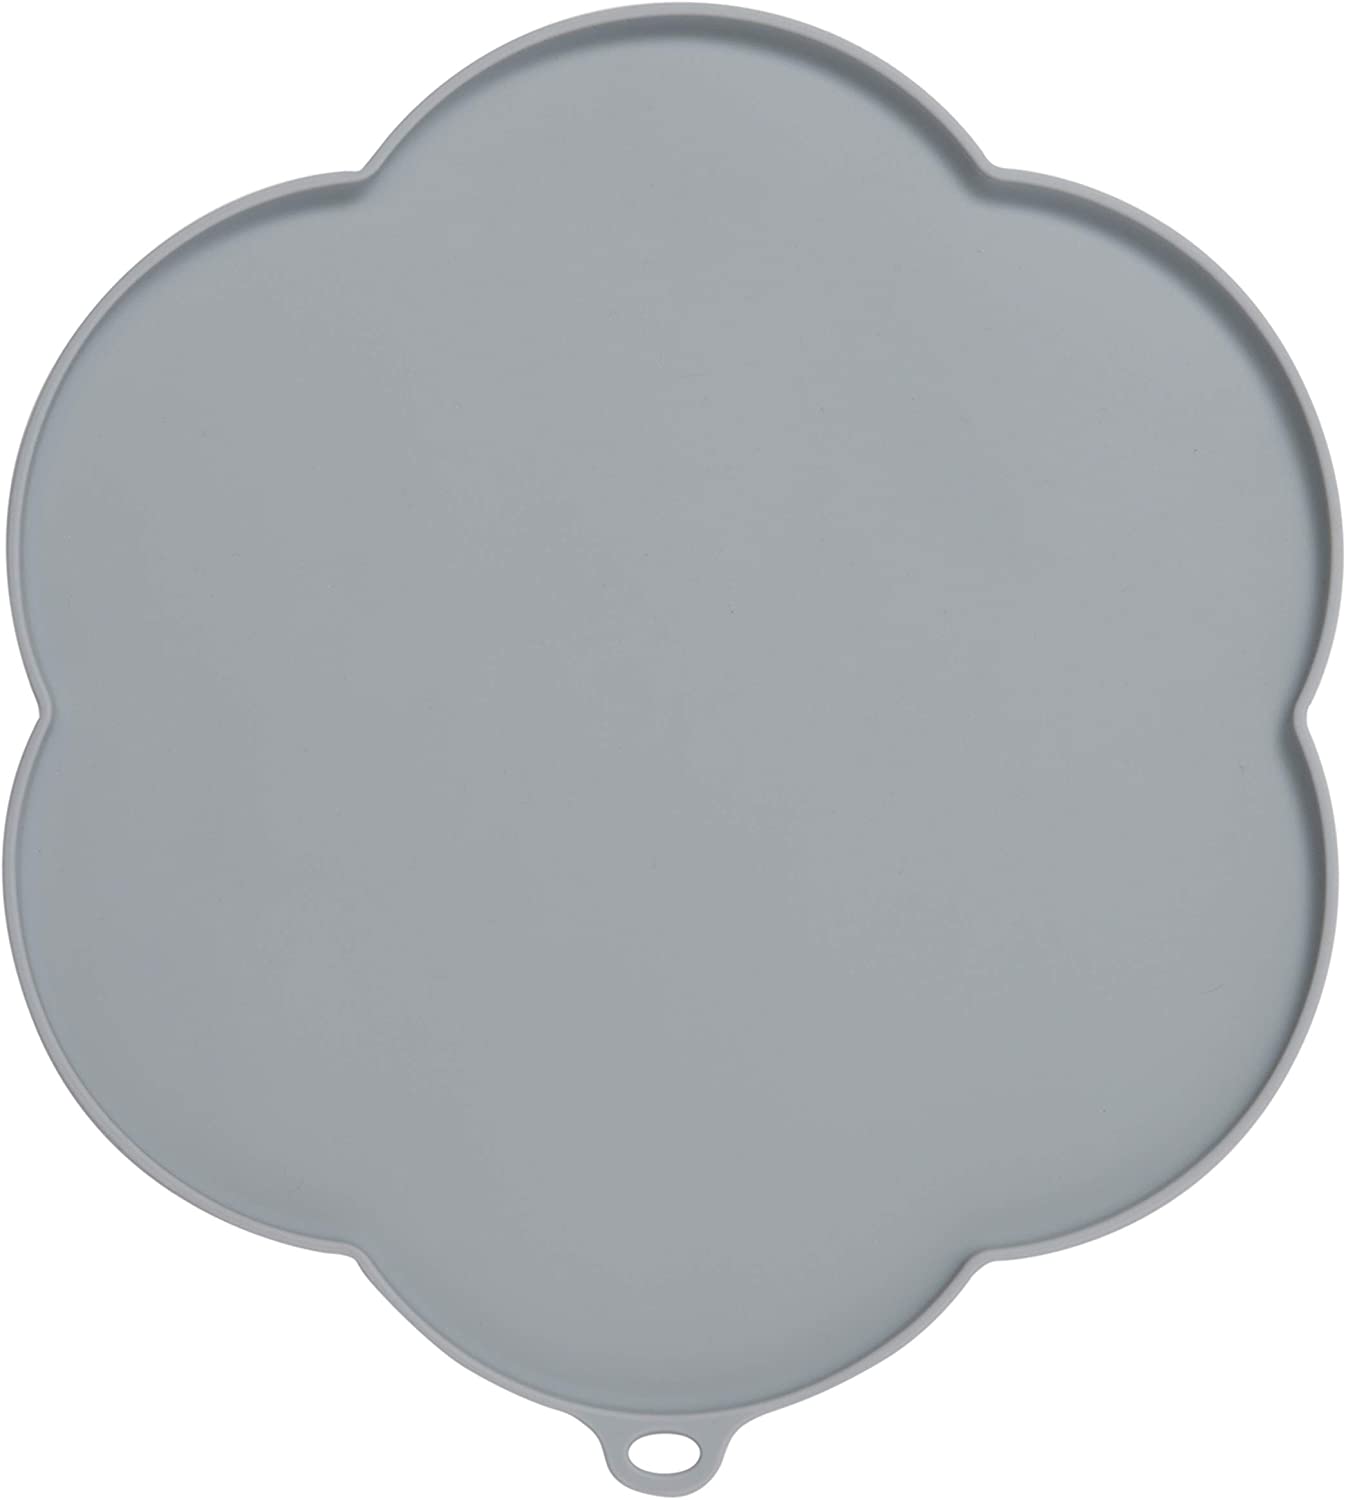 Catit Flower Fountain & Bowls Placemats Grey